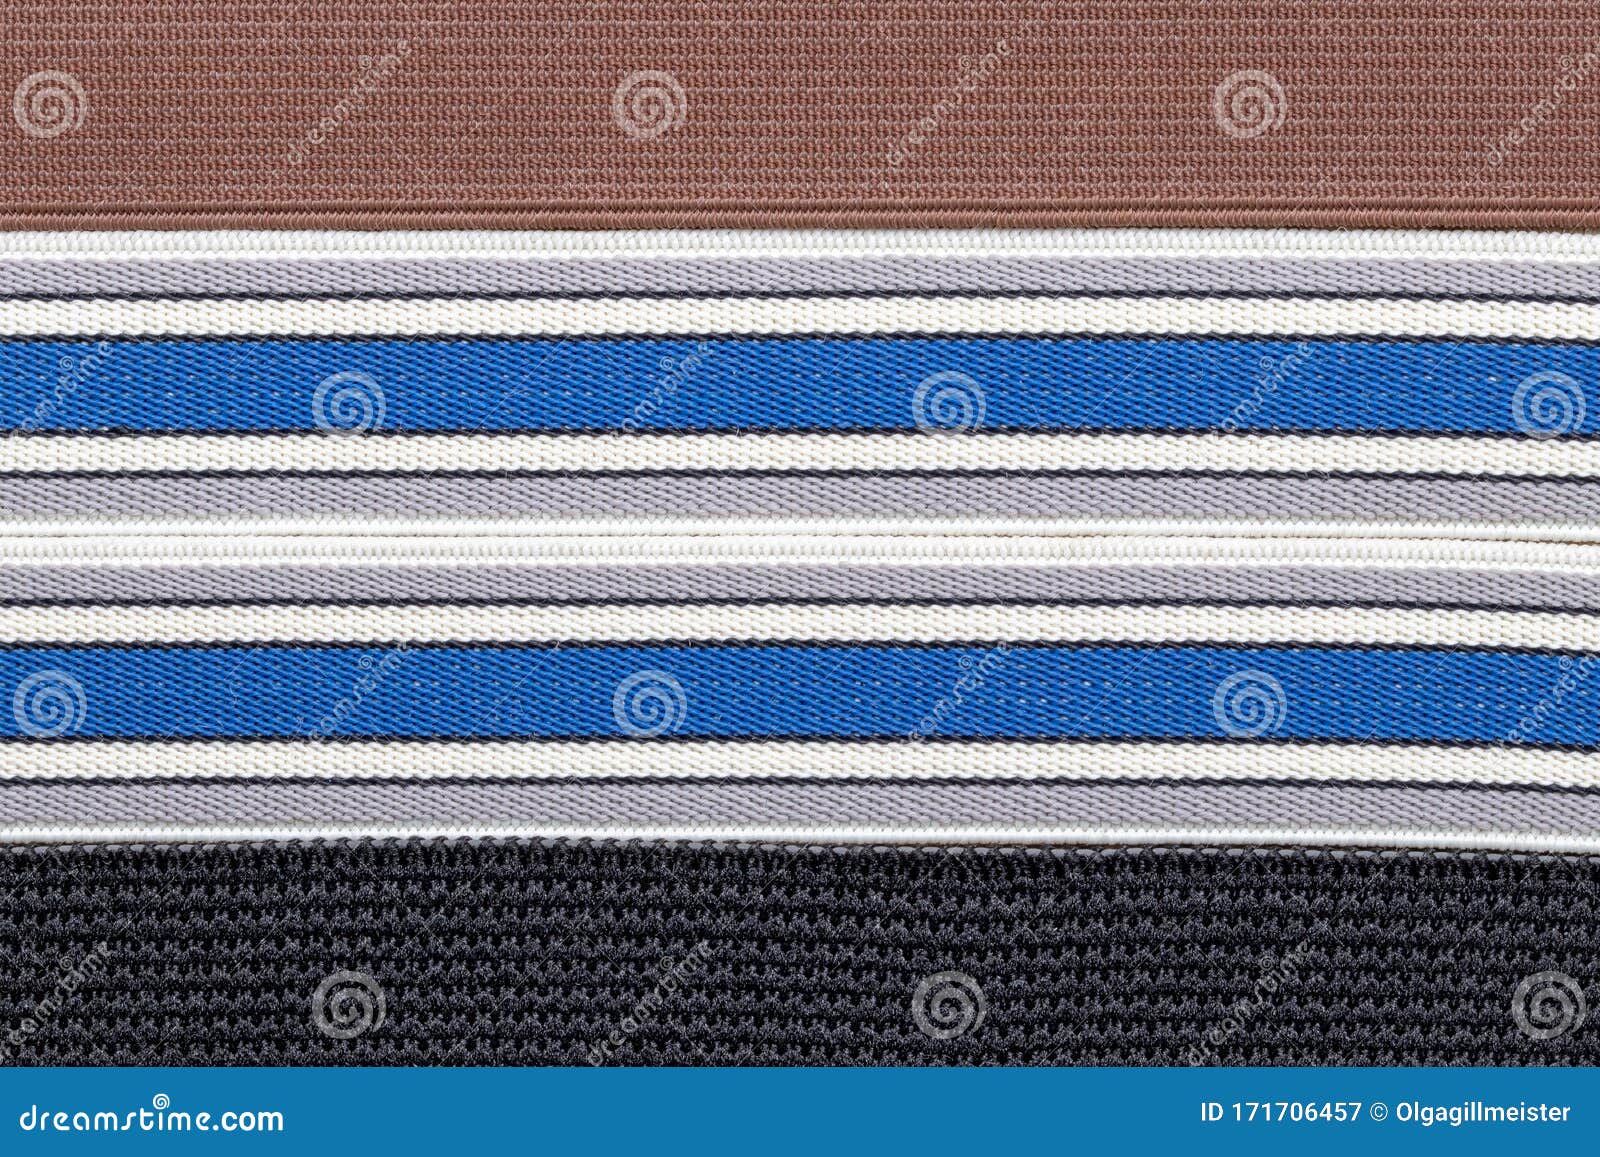 Elastic Band For Sewing Clothes Sewing Rubber Band Elastic For Clothing  Texture Background Stock Photo - Download Image Now - iStock